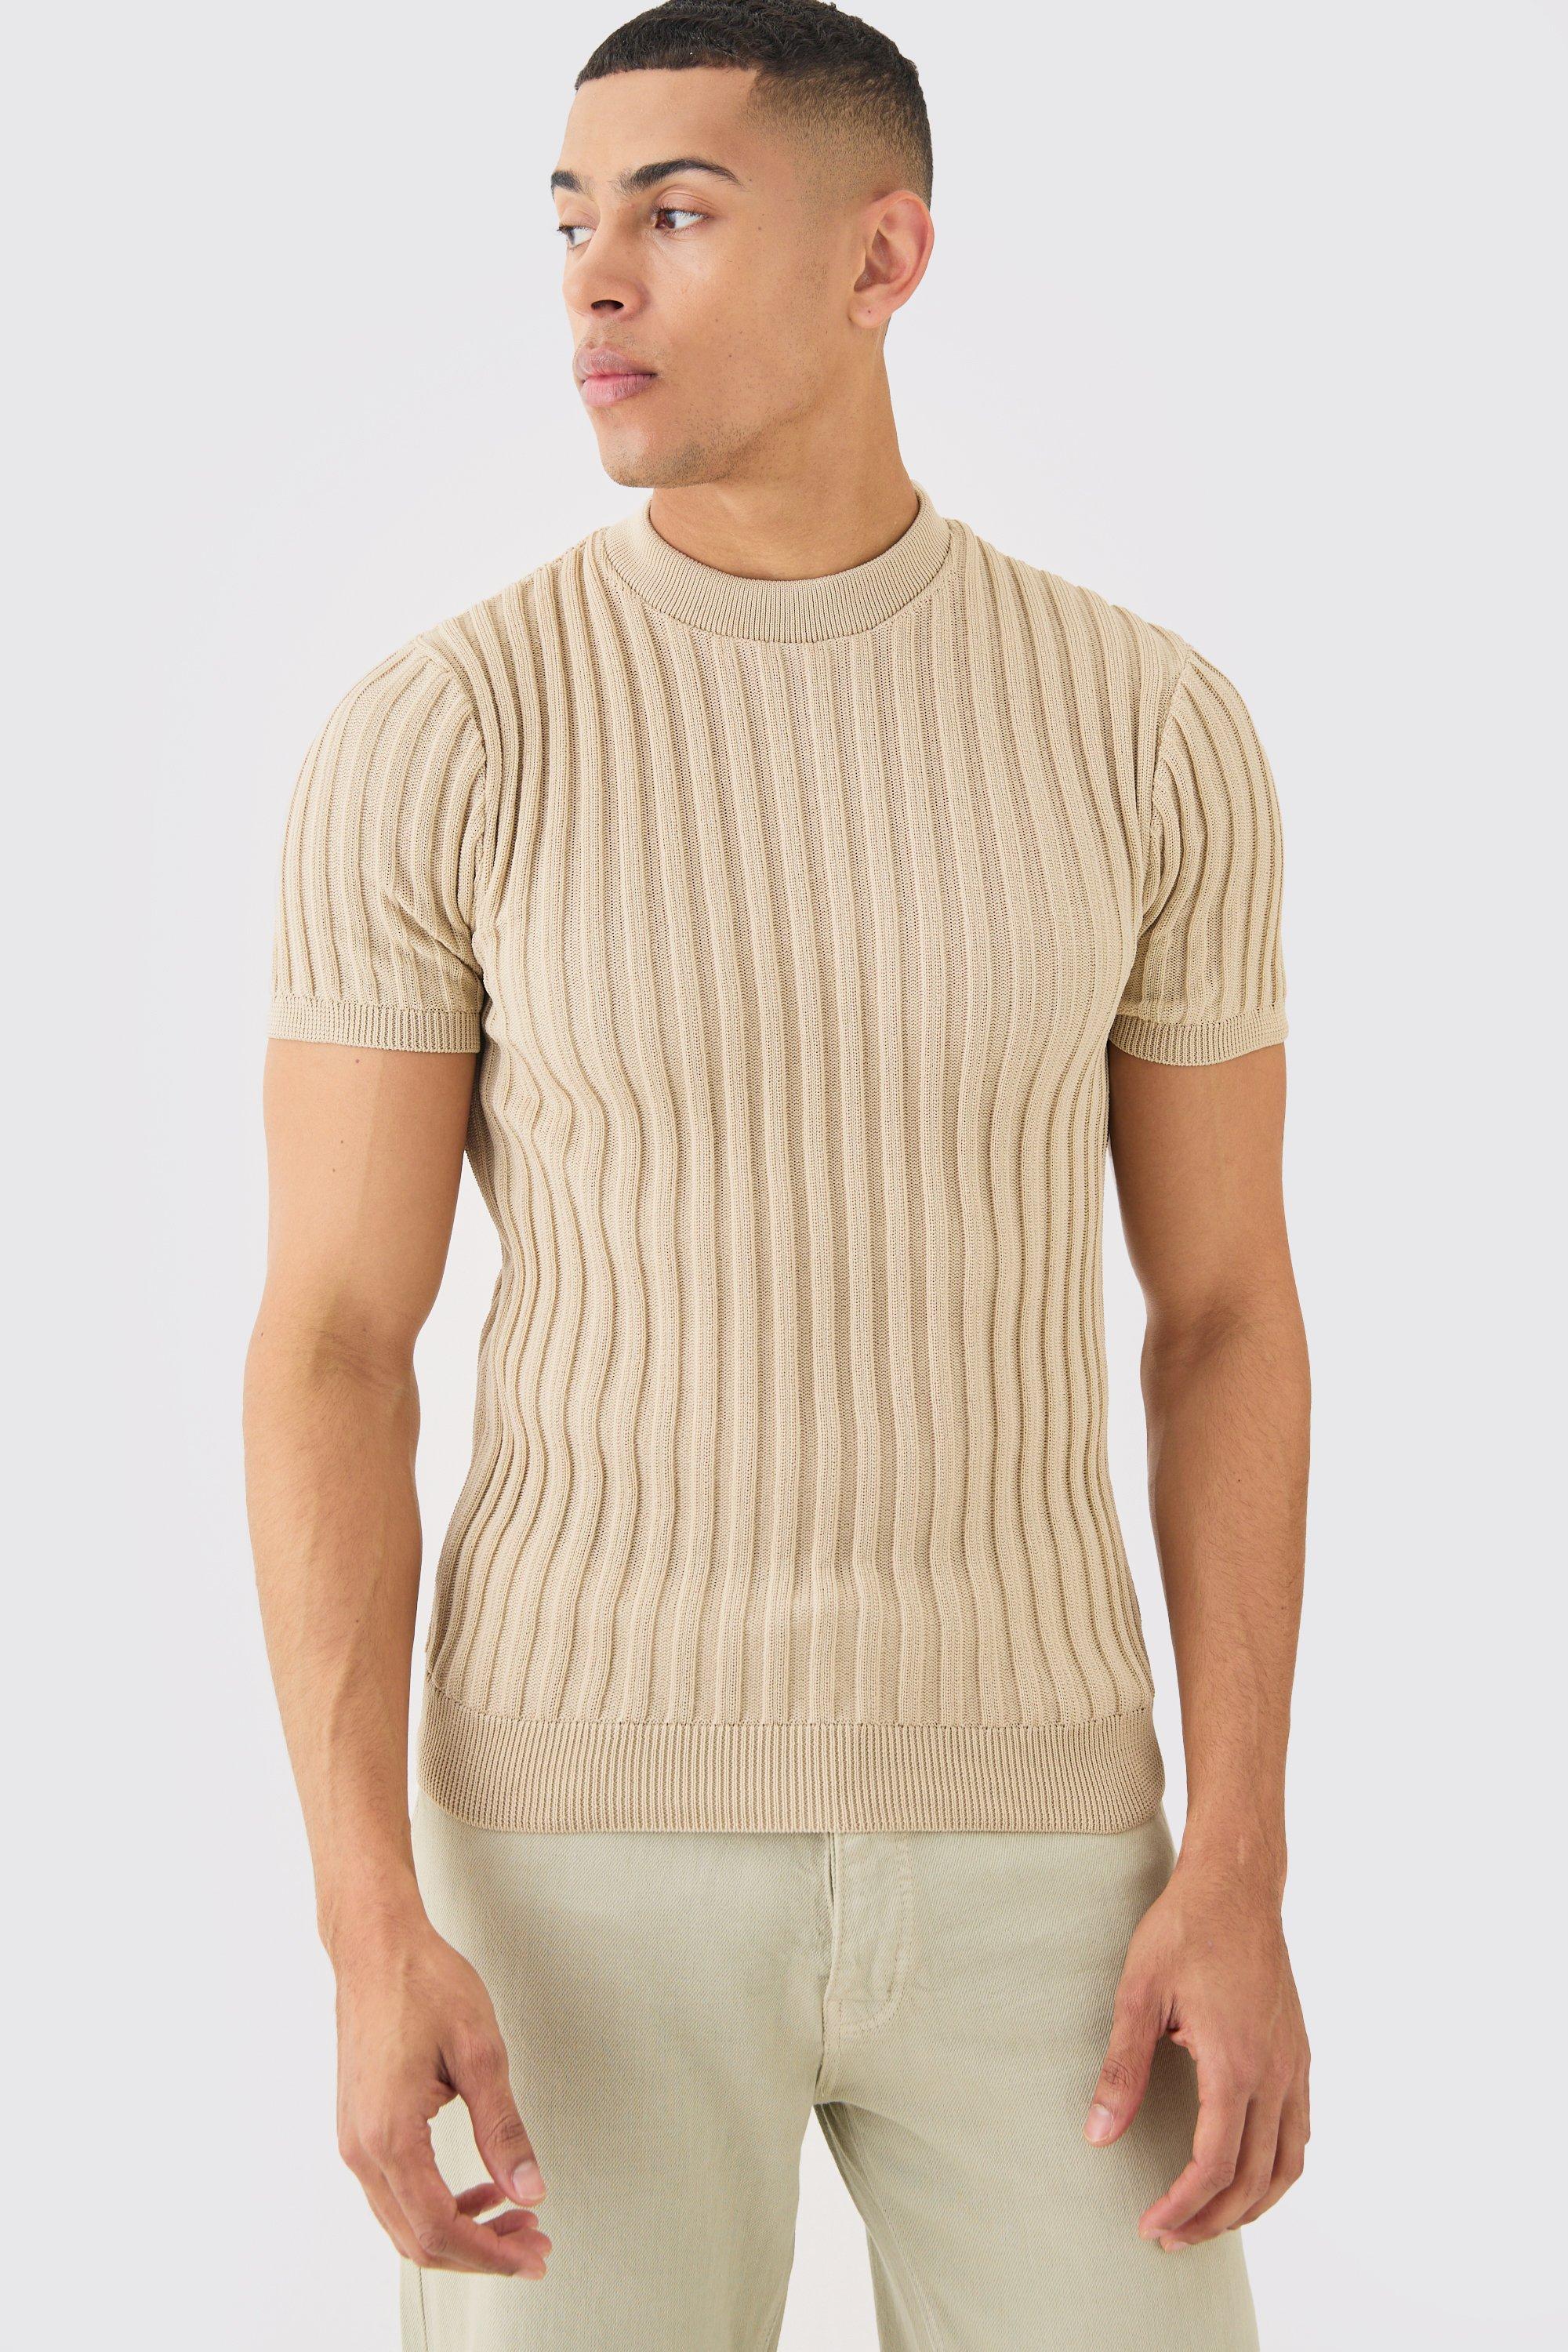 Image of Muscle Fit Ribbed Knit T-shirt, Beige